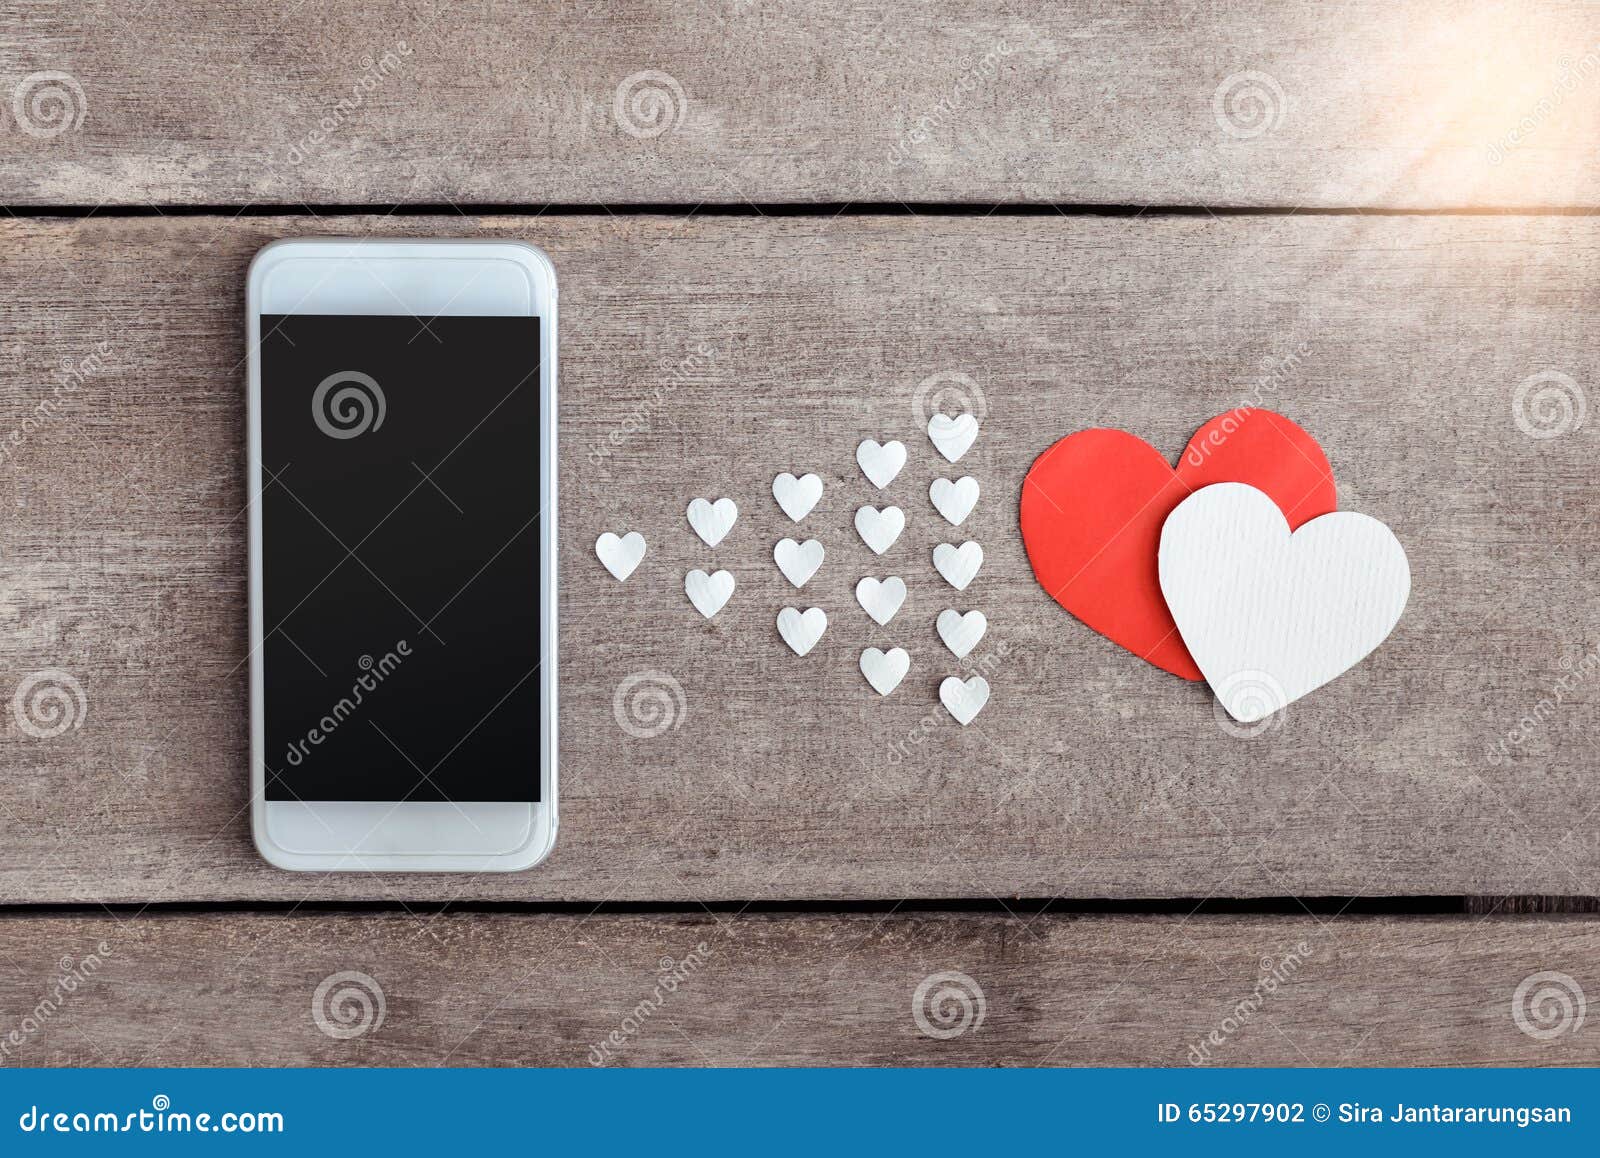 smartphone and hearts paper on wooden background